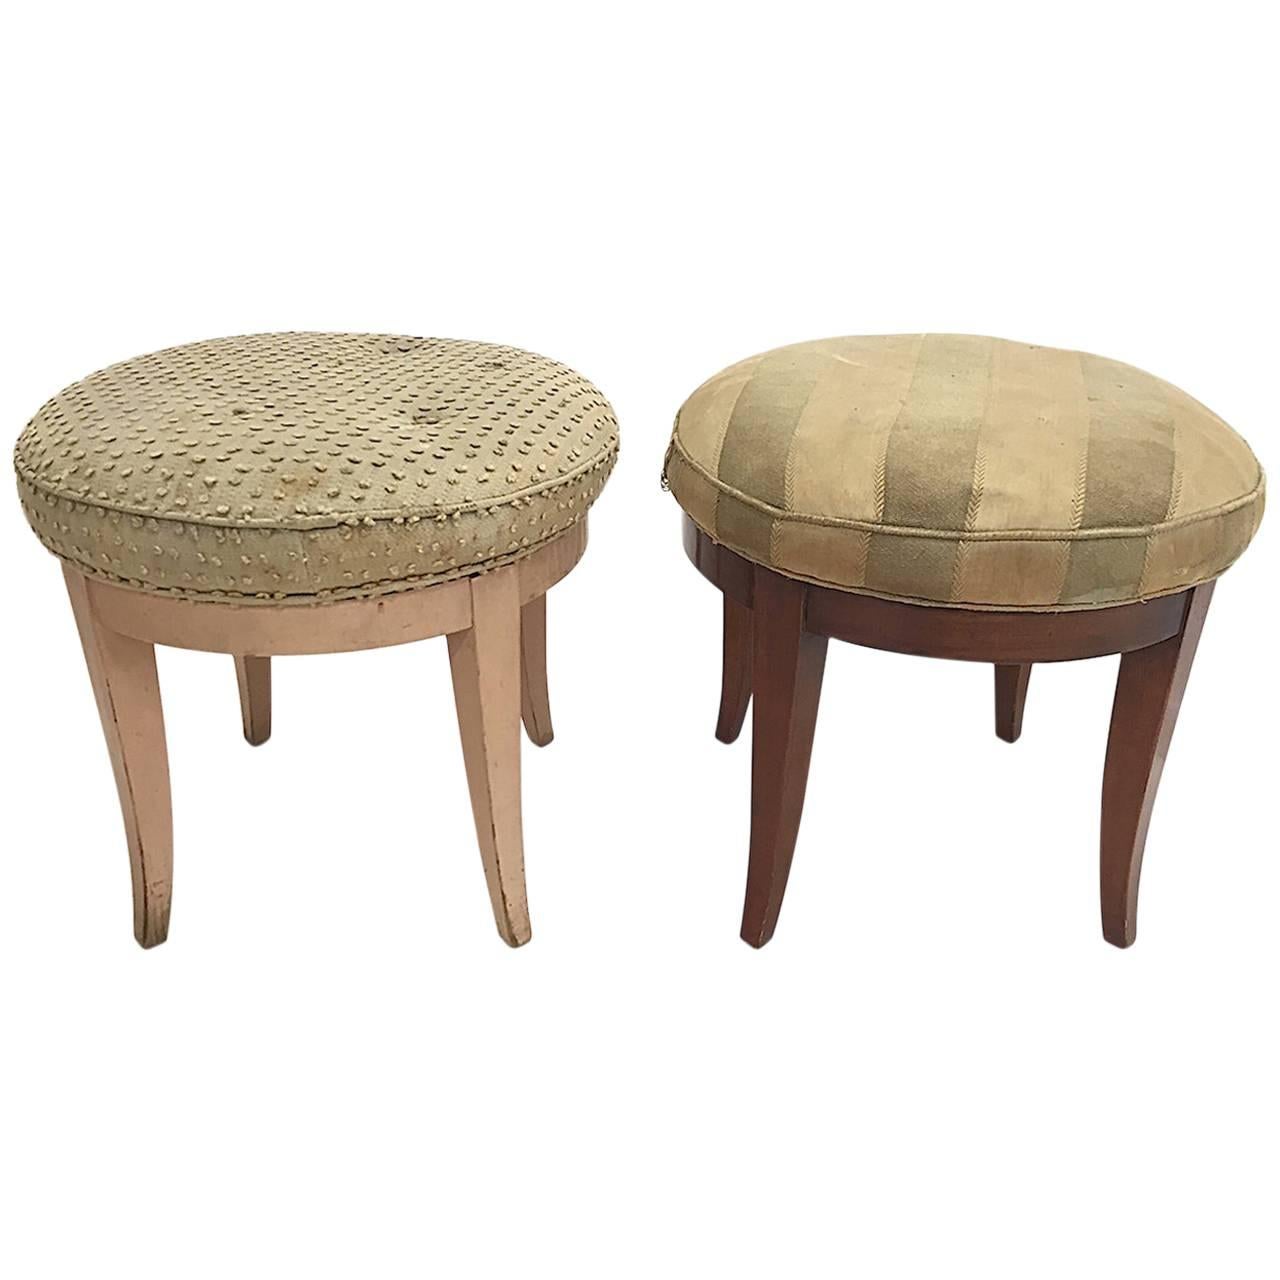 Pair of Custom Paul Frankl Swivel Stools from a Documented Frankl Interior